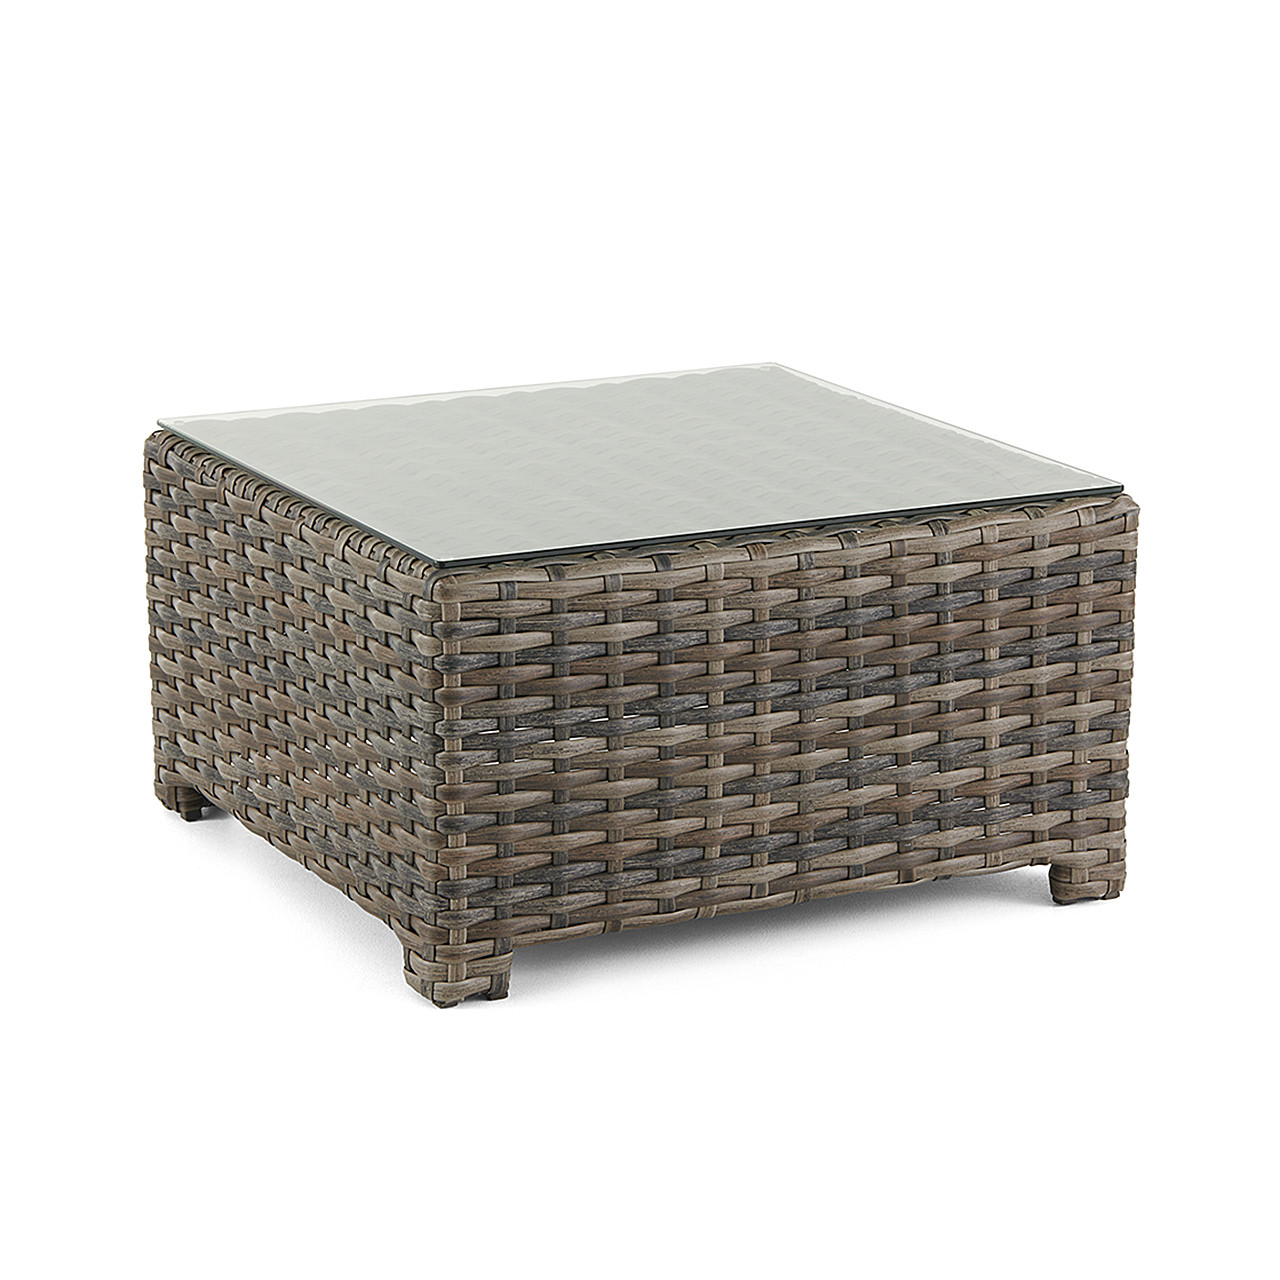 Contempo Husk Outdoor Wicker with Cushions 3 Piece Swivel Sofa Group + 32 in. Sq. Glass Top Coffee Table